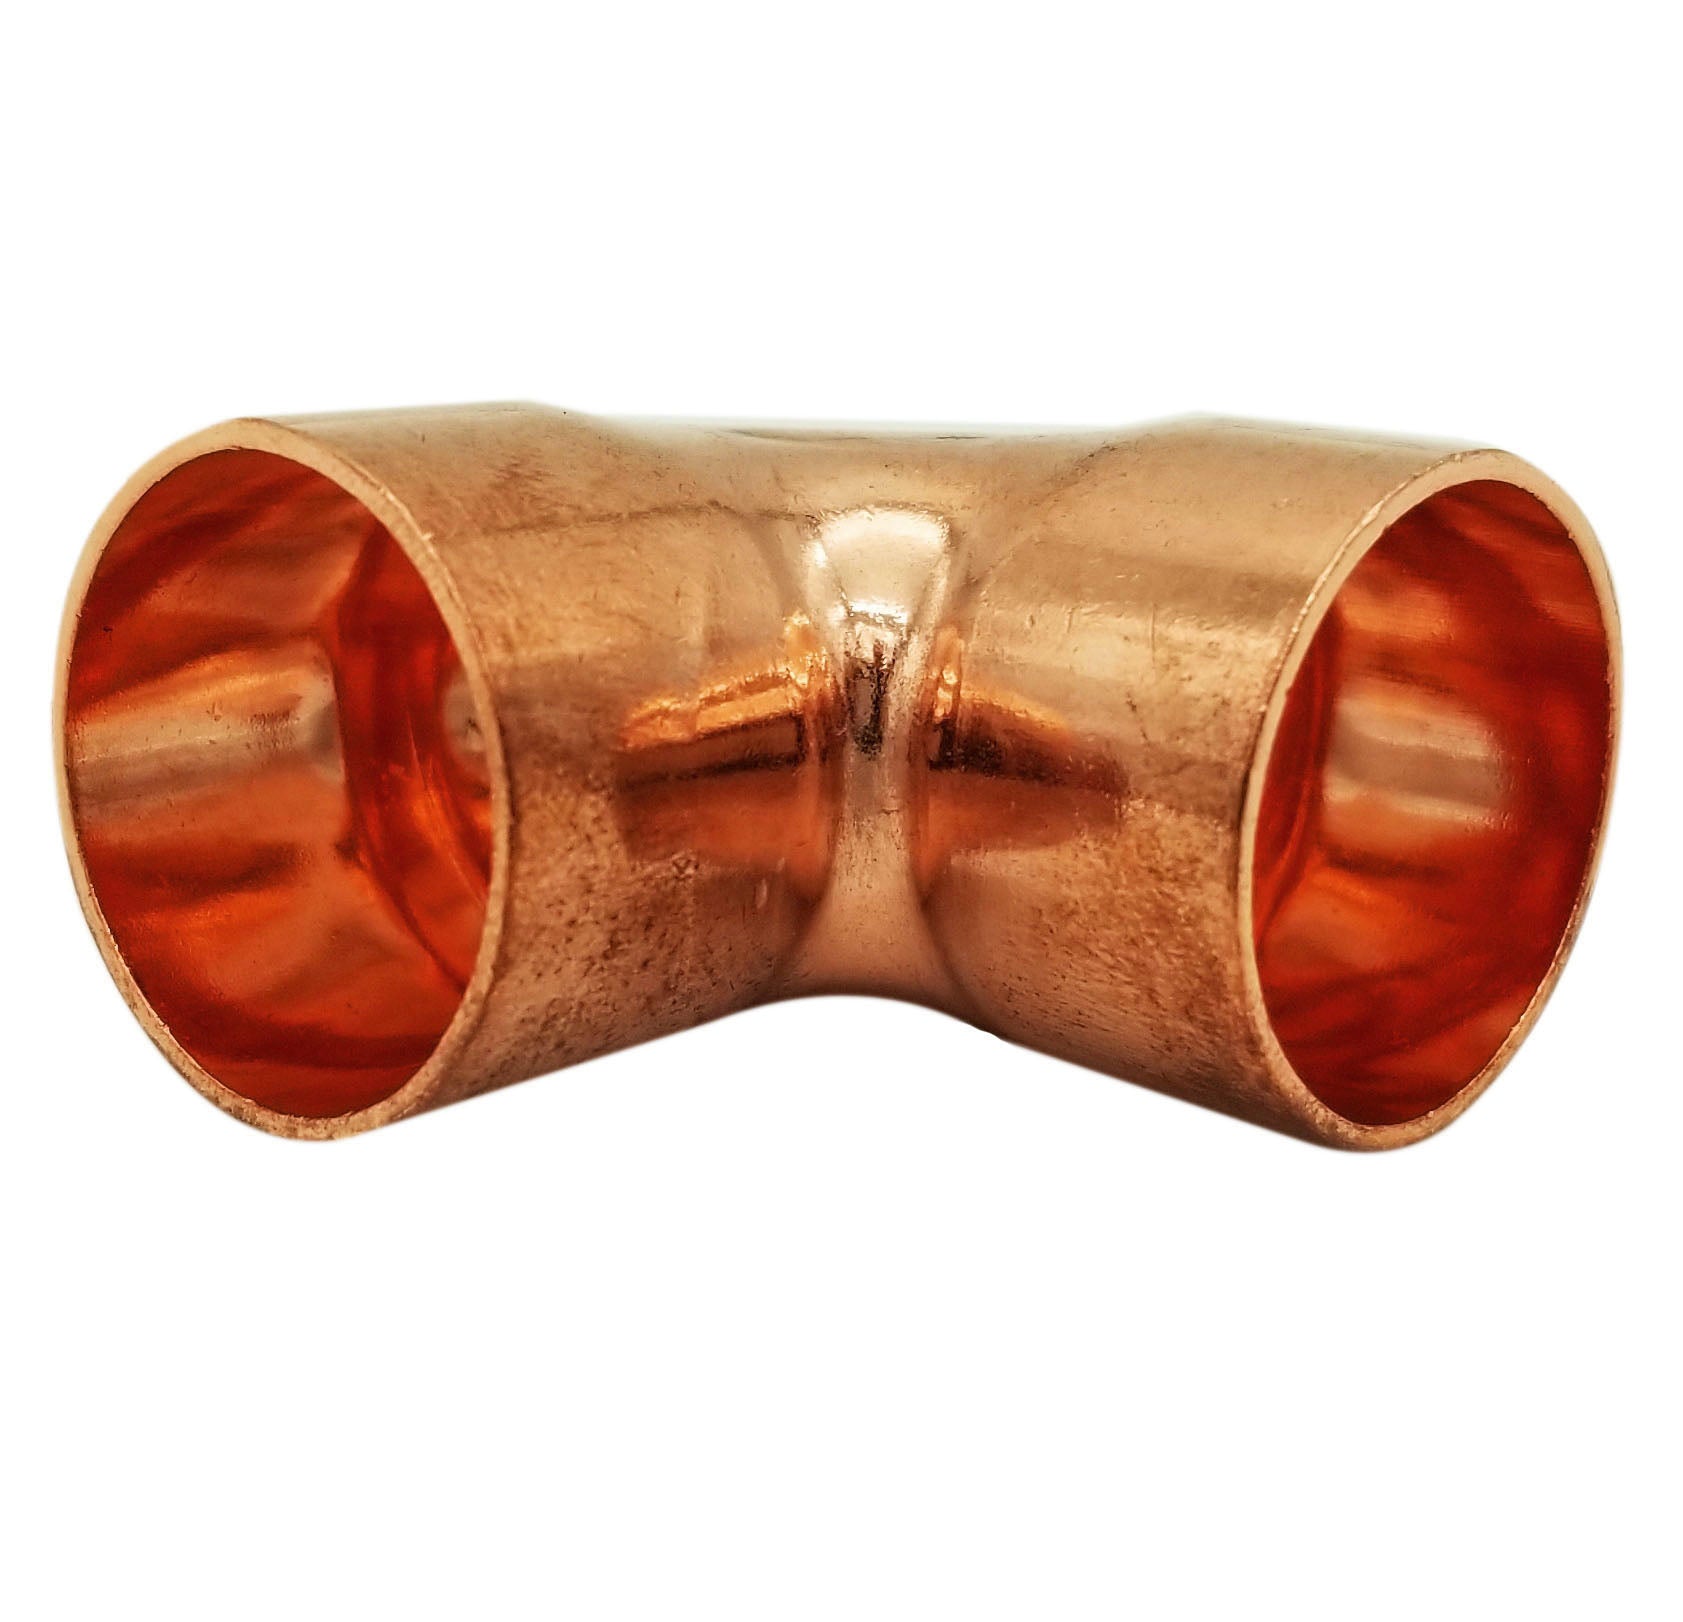 Copper Fitting 3/4 Inch (HVAC Outer Dimension) 5/8 Inch (Plumbing Inner Dimension) - 45 Degree Copper Pressure Elbow & HVAC – 99.9% Pure Copper - 5 Pack